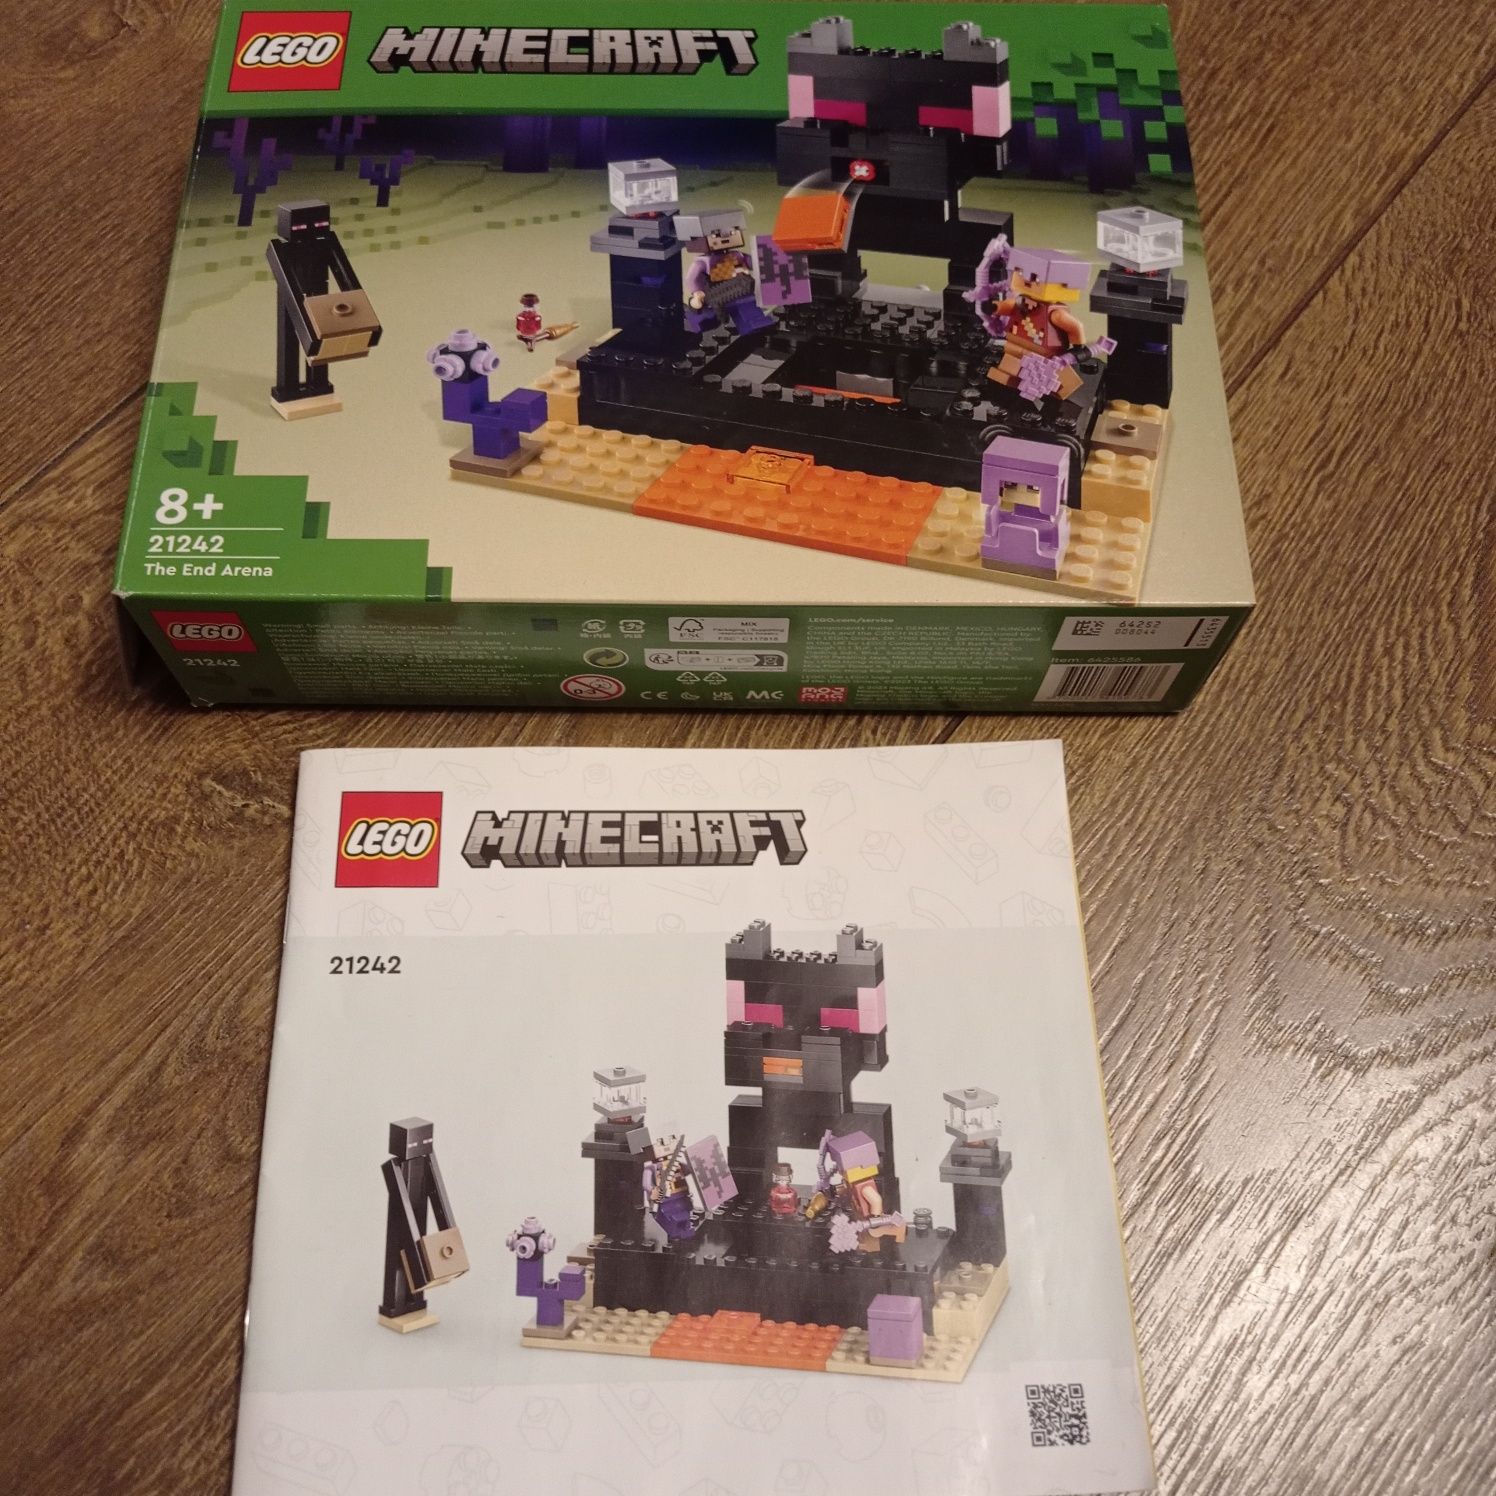 LEGO Minecraft the end arena